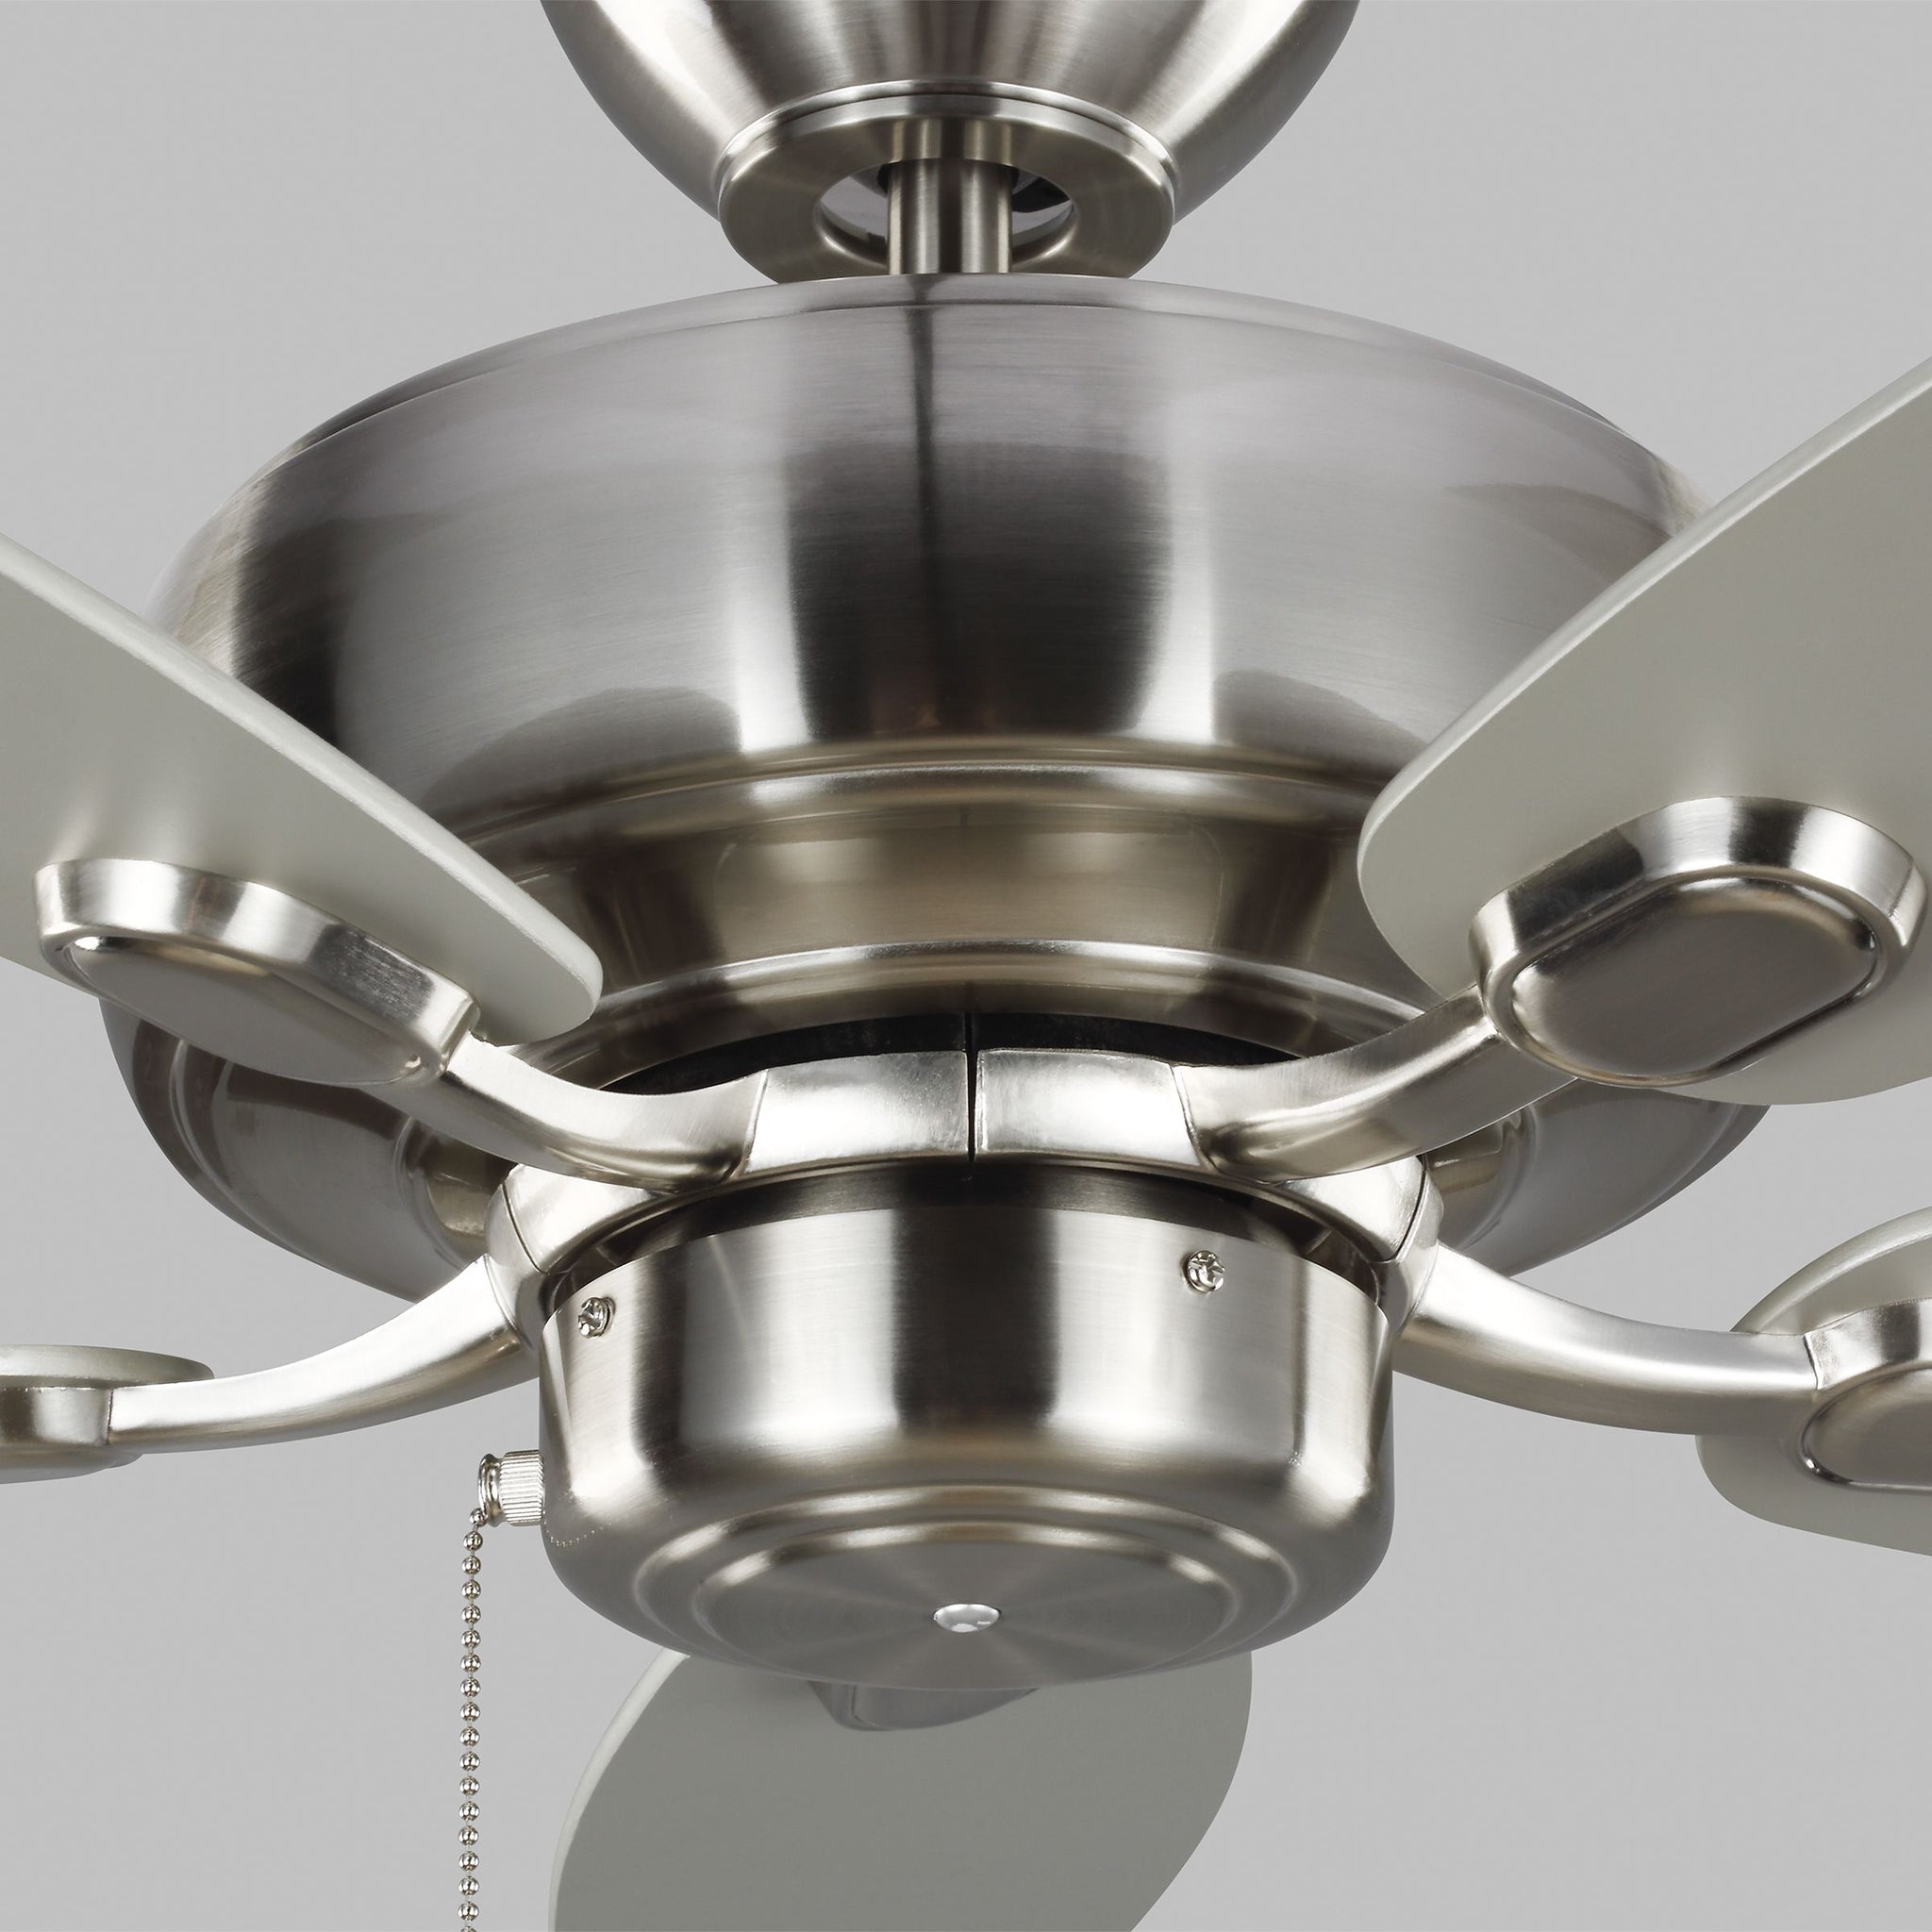 Centro Max II Ceiling Fan Brushed Steel